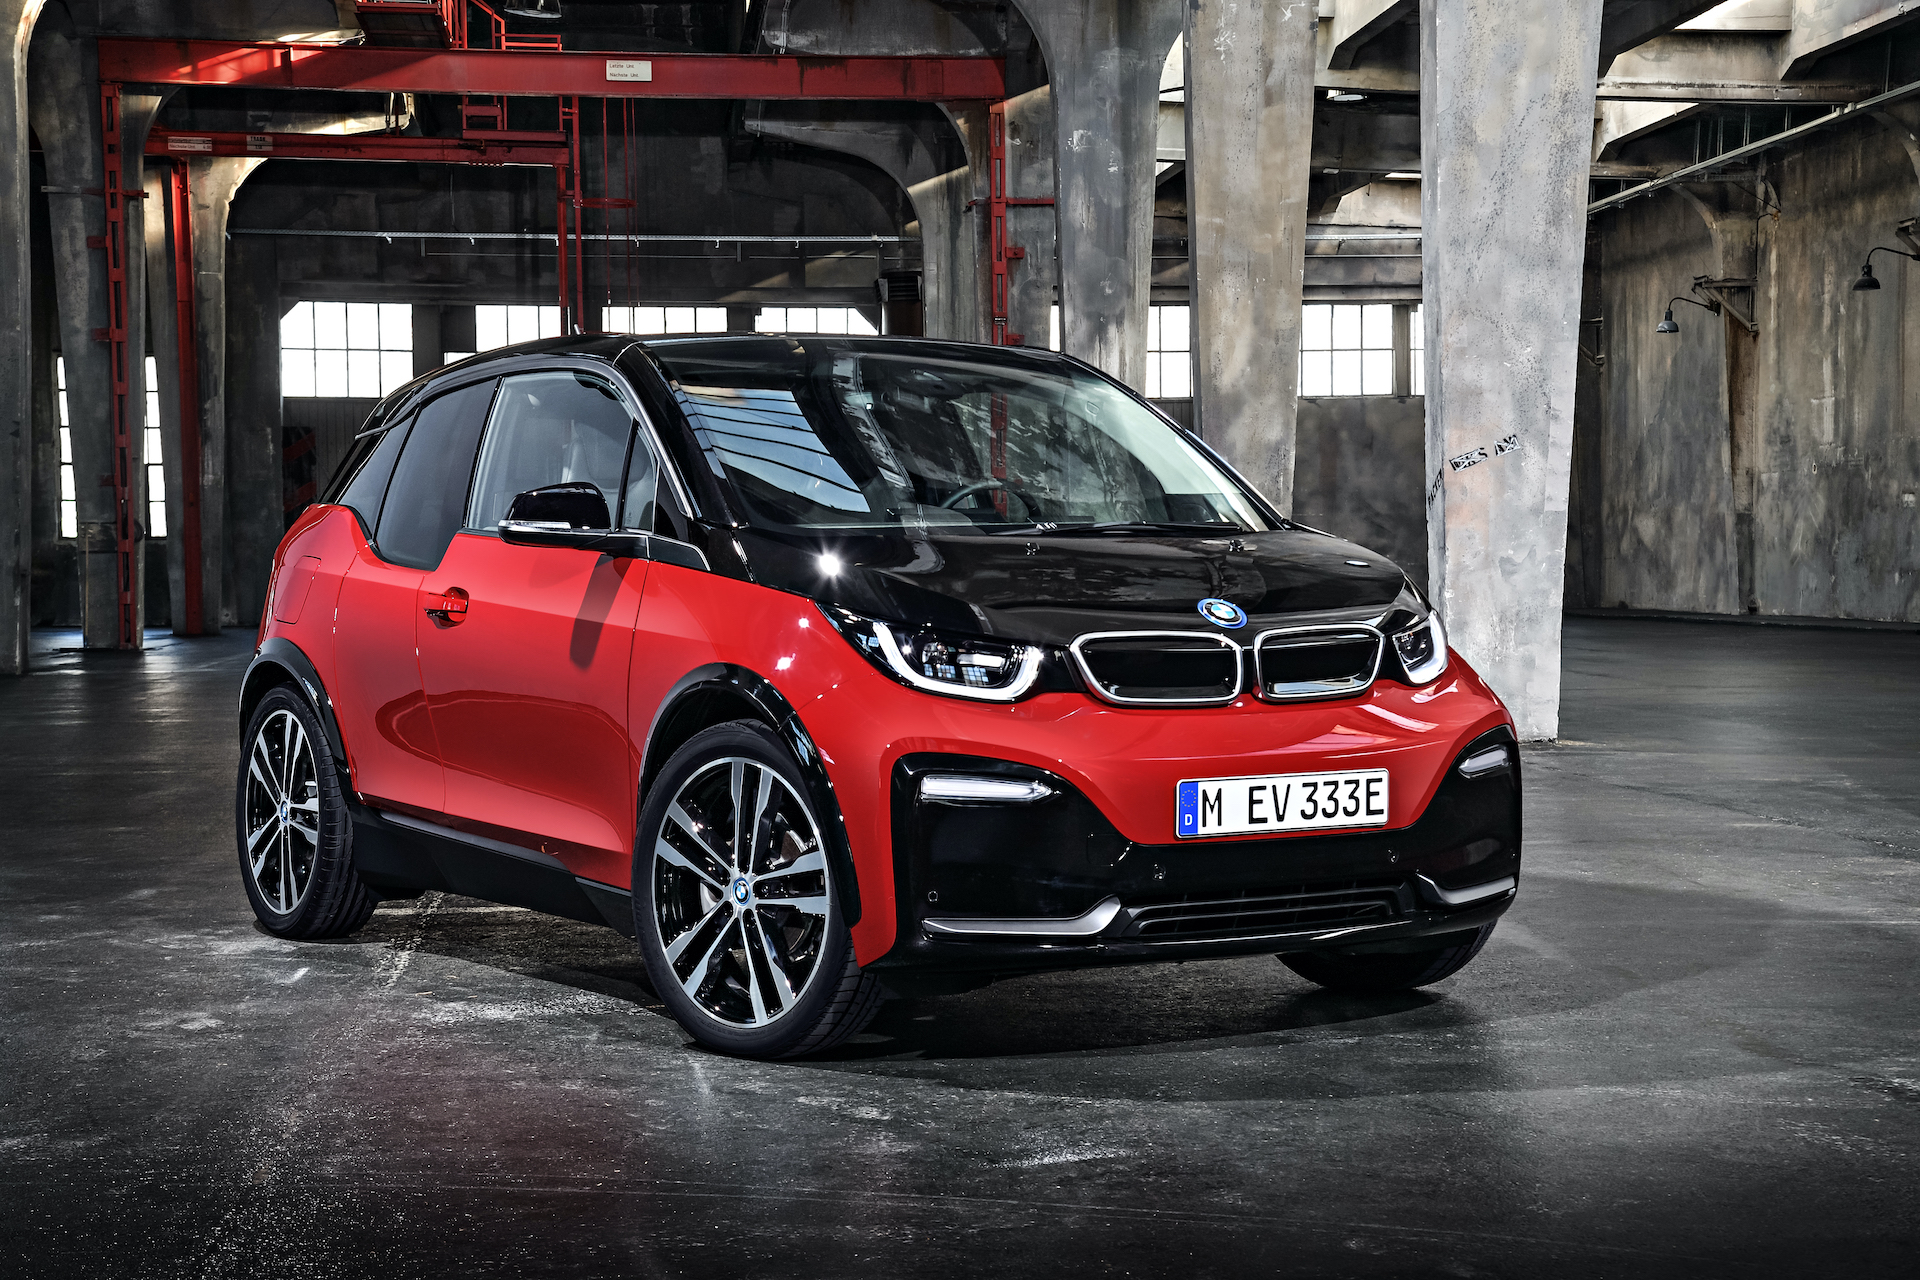 BMW i3 EV sequel won't be an "outsider," claims development boss